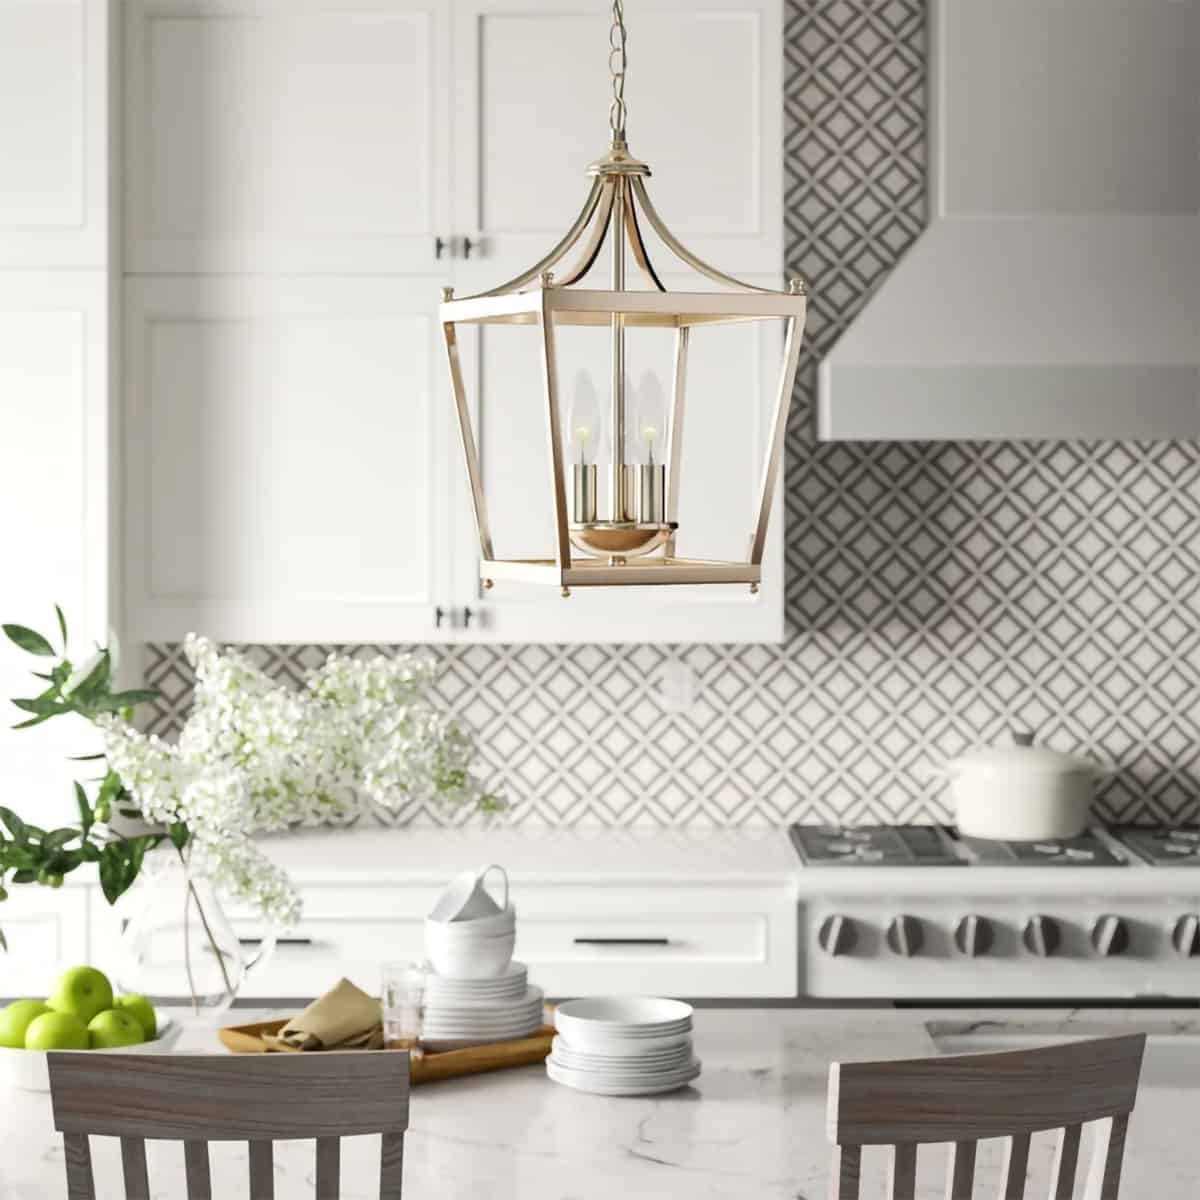 Silver traditional lantern style pendant lamp with candle style lights centered above marbled island in country French kitchen featuring grey and white backsplash.